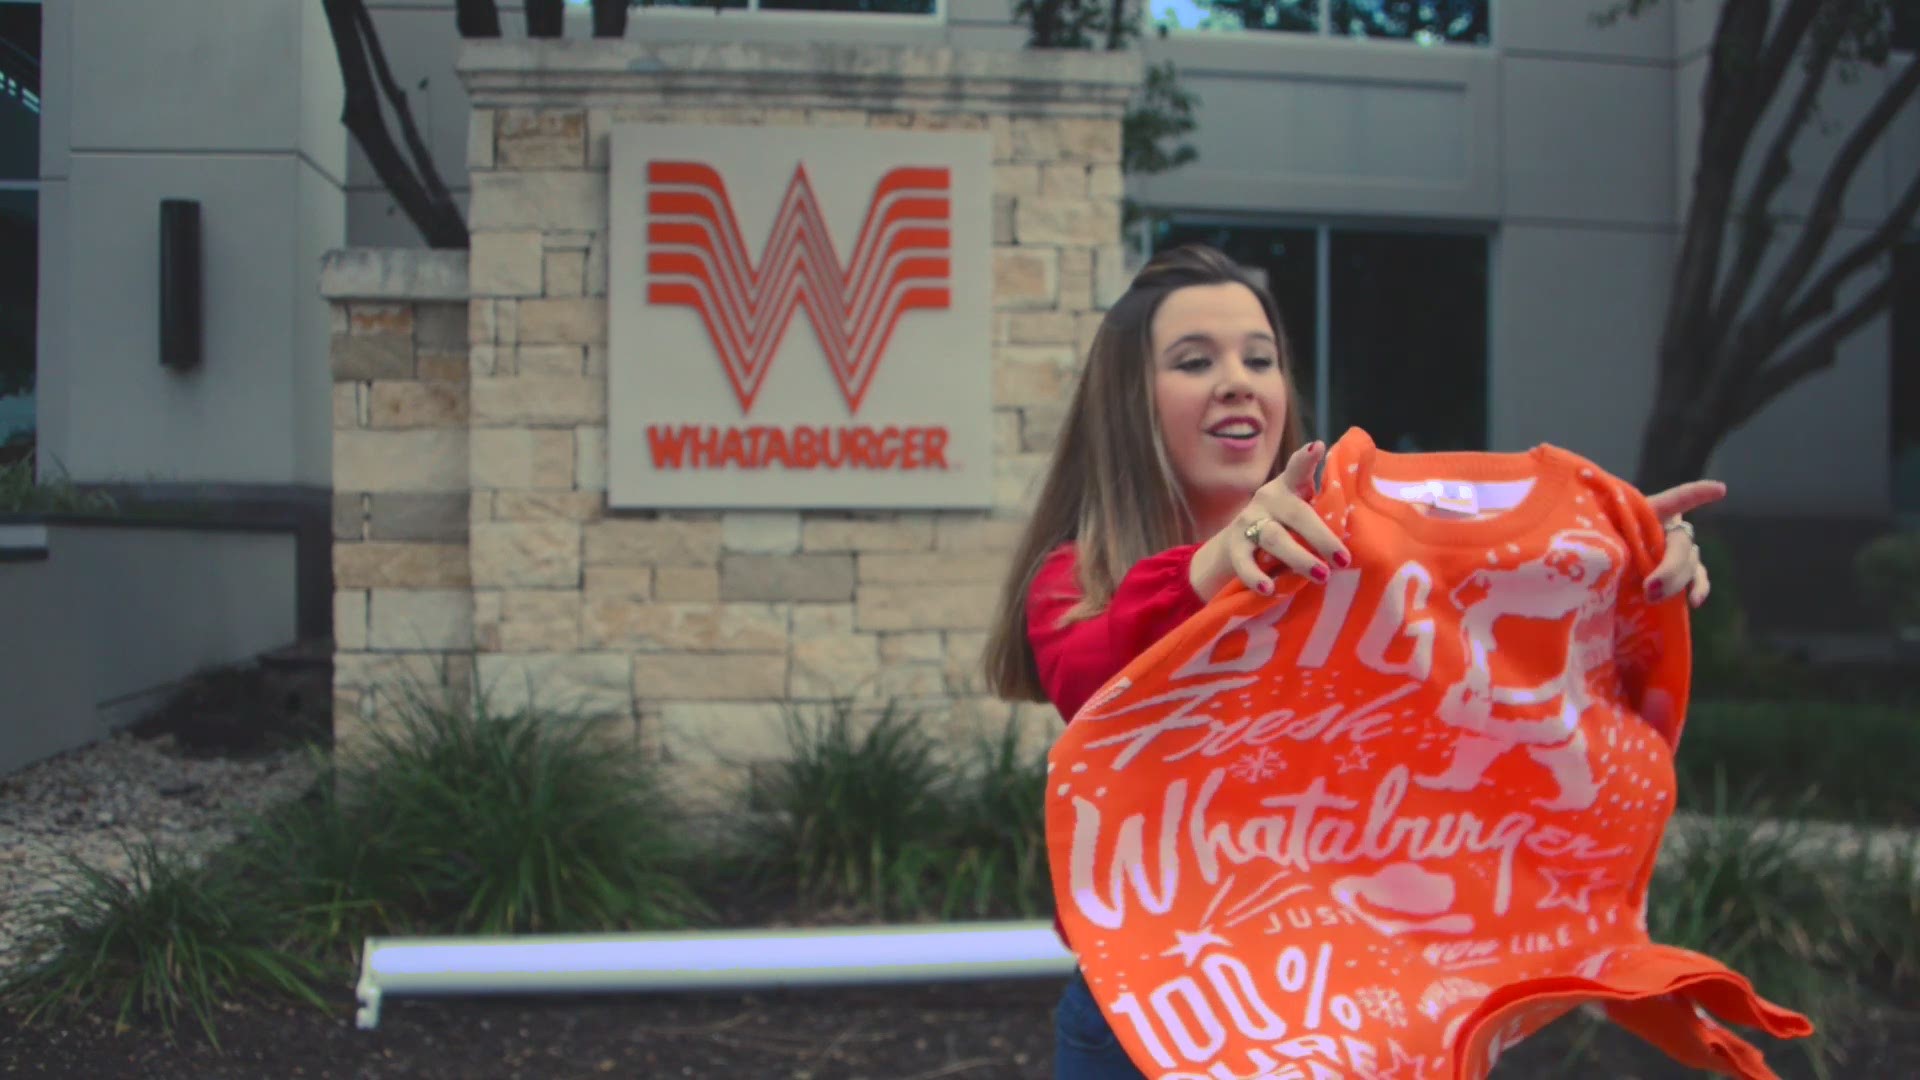 Whata-sweater! The orange and white chain unveiled their 2019 Christmas wear so Texans everywhere can get into the holiday spirit.